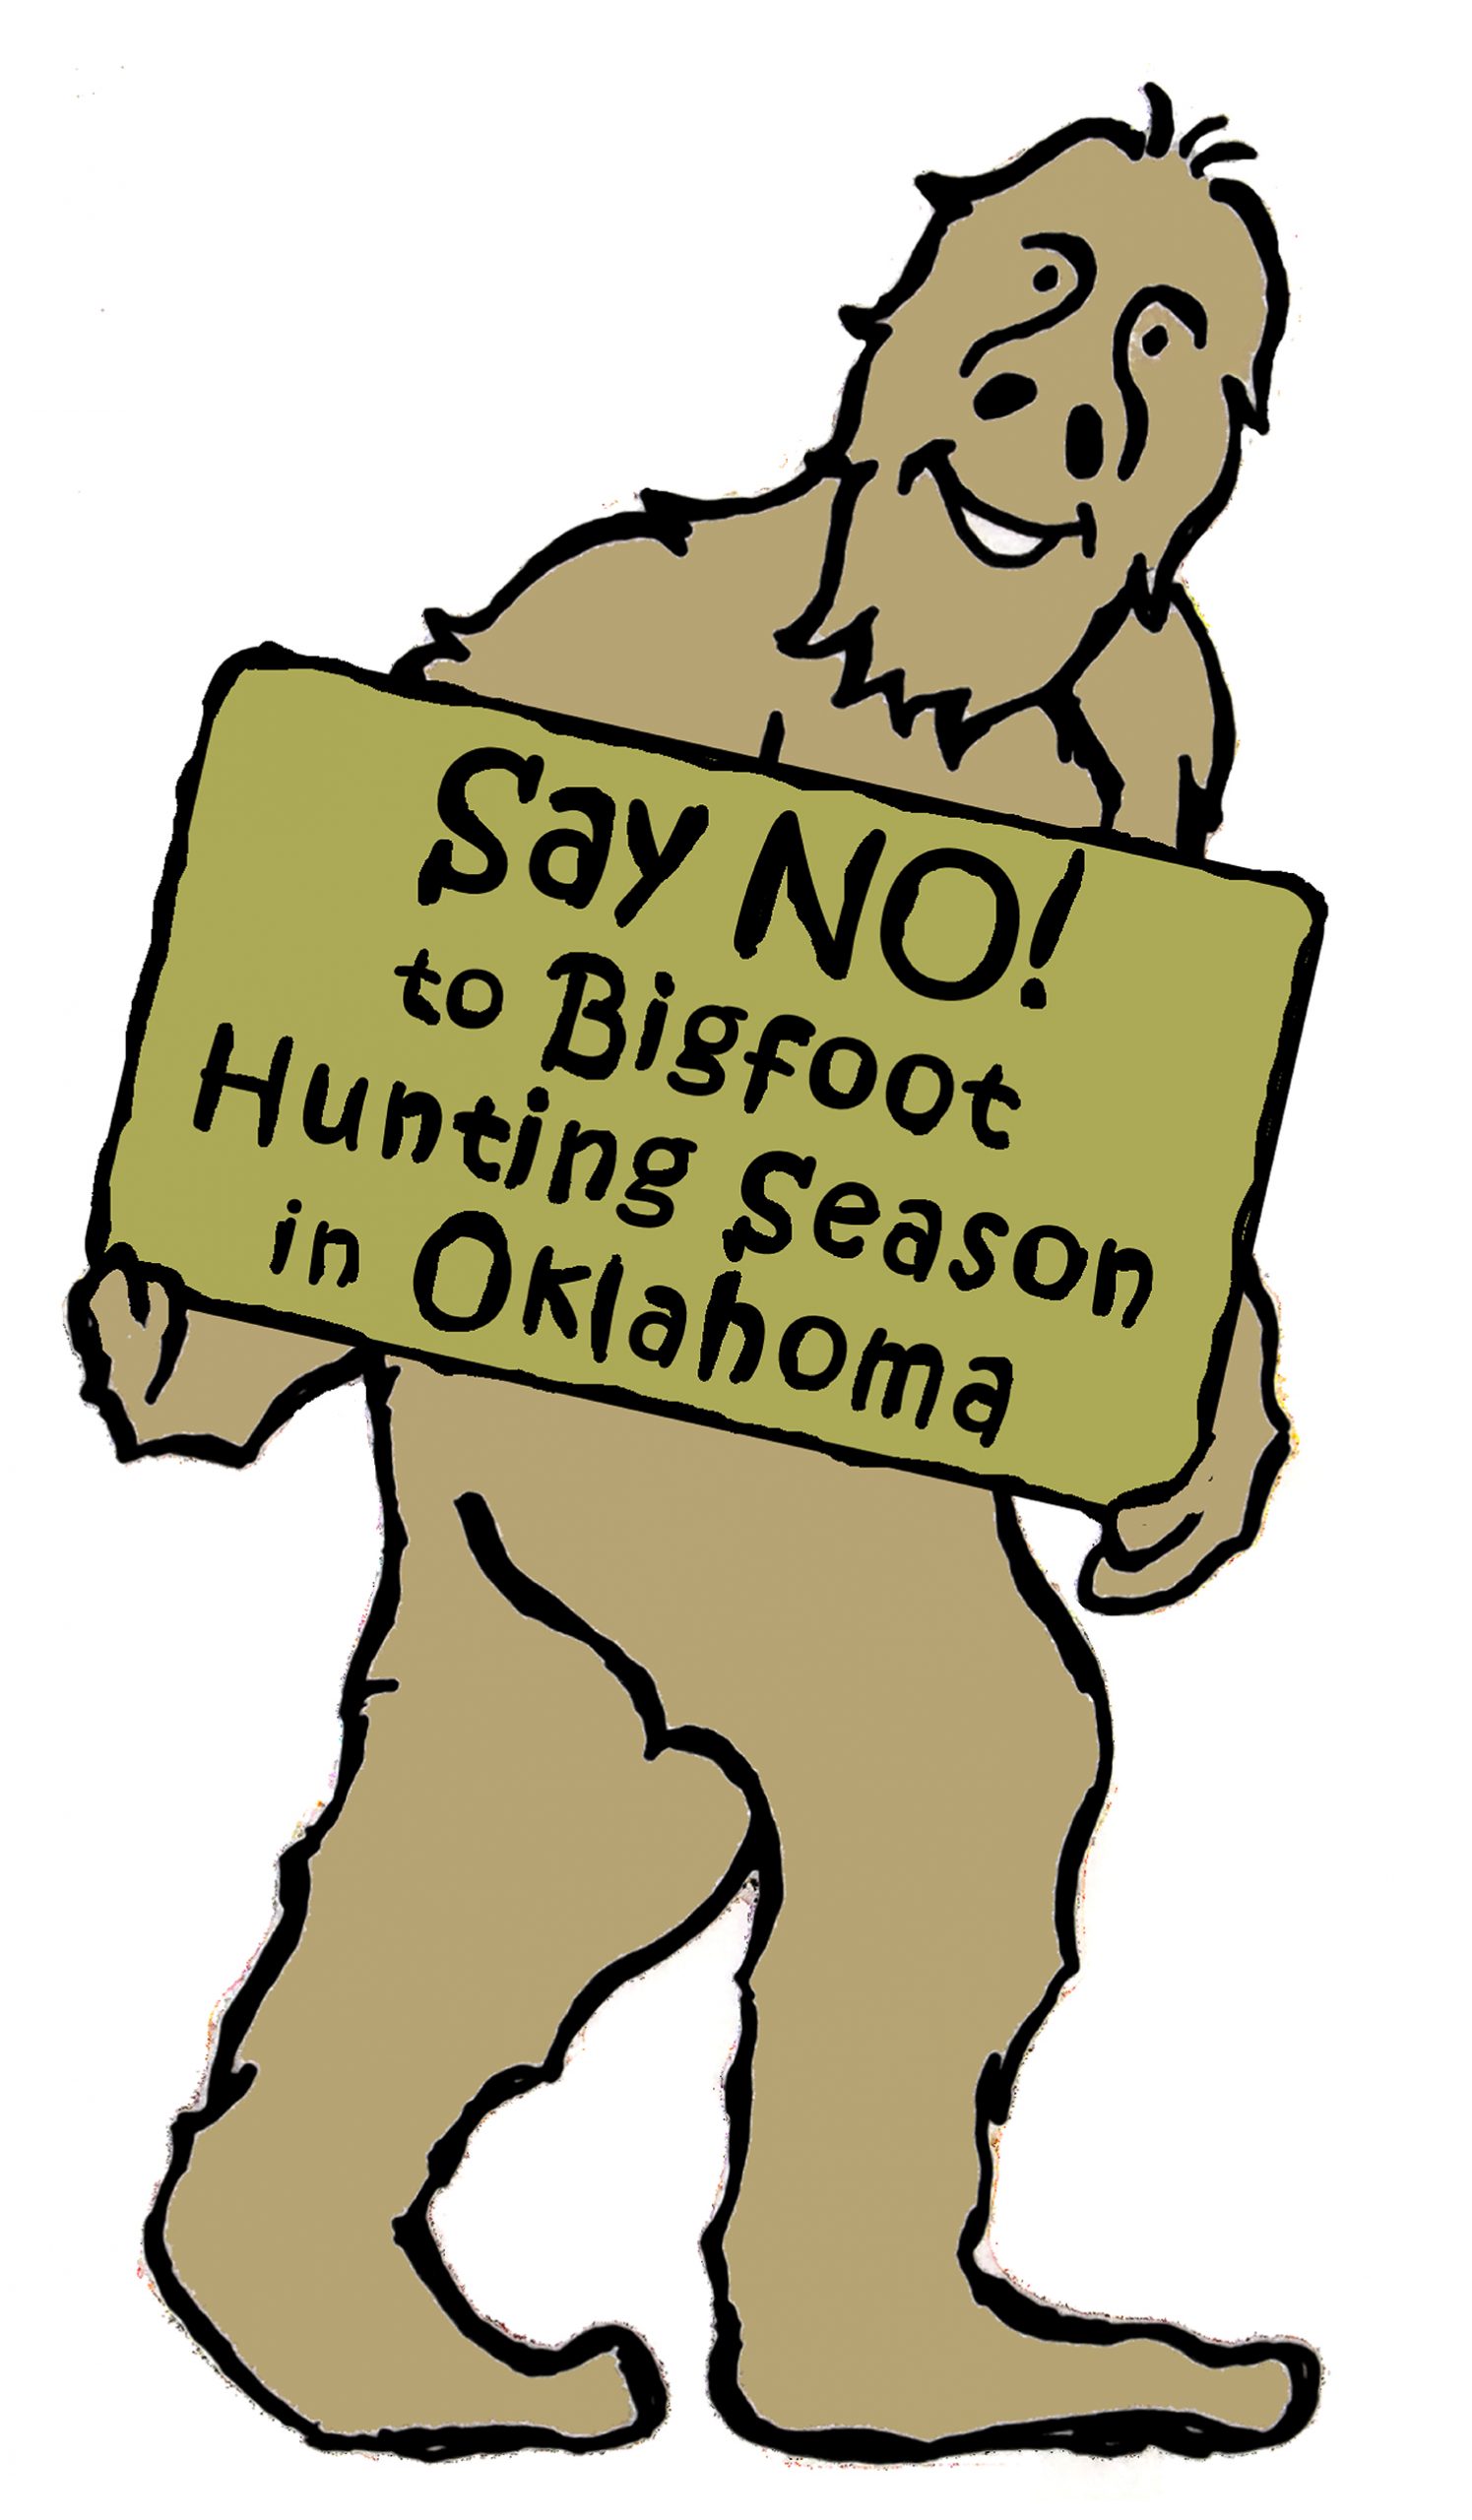 BigFoot Visits the Big Cities of the World - Another BigFoot Sighting